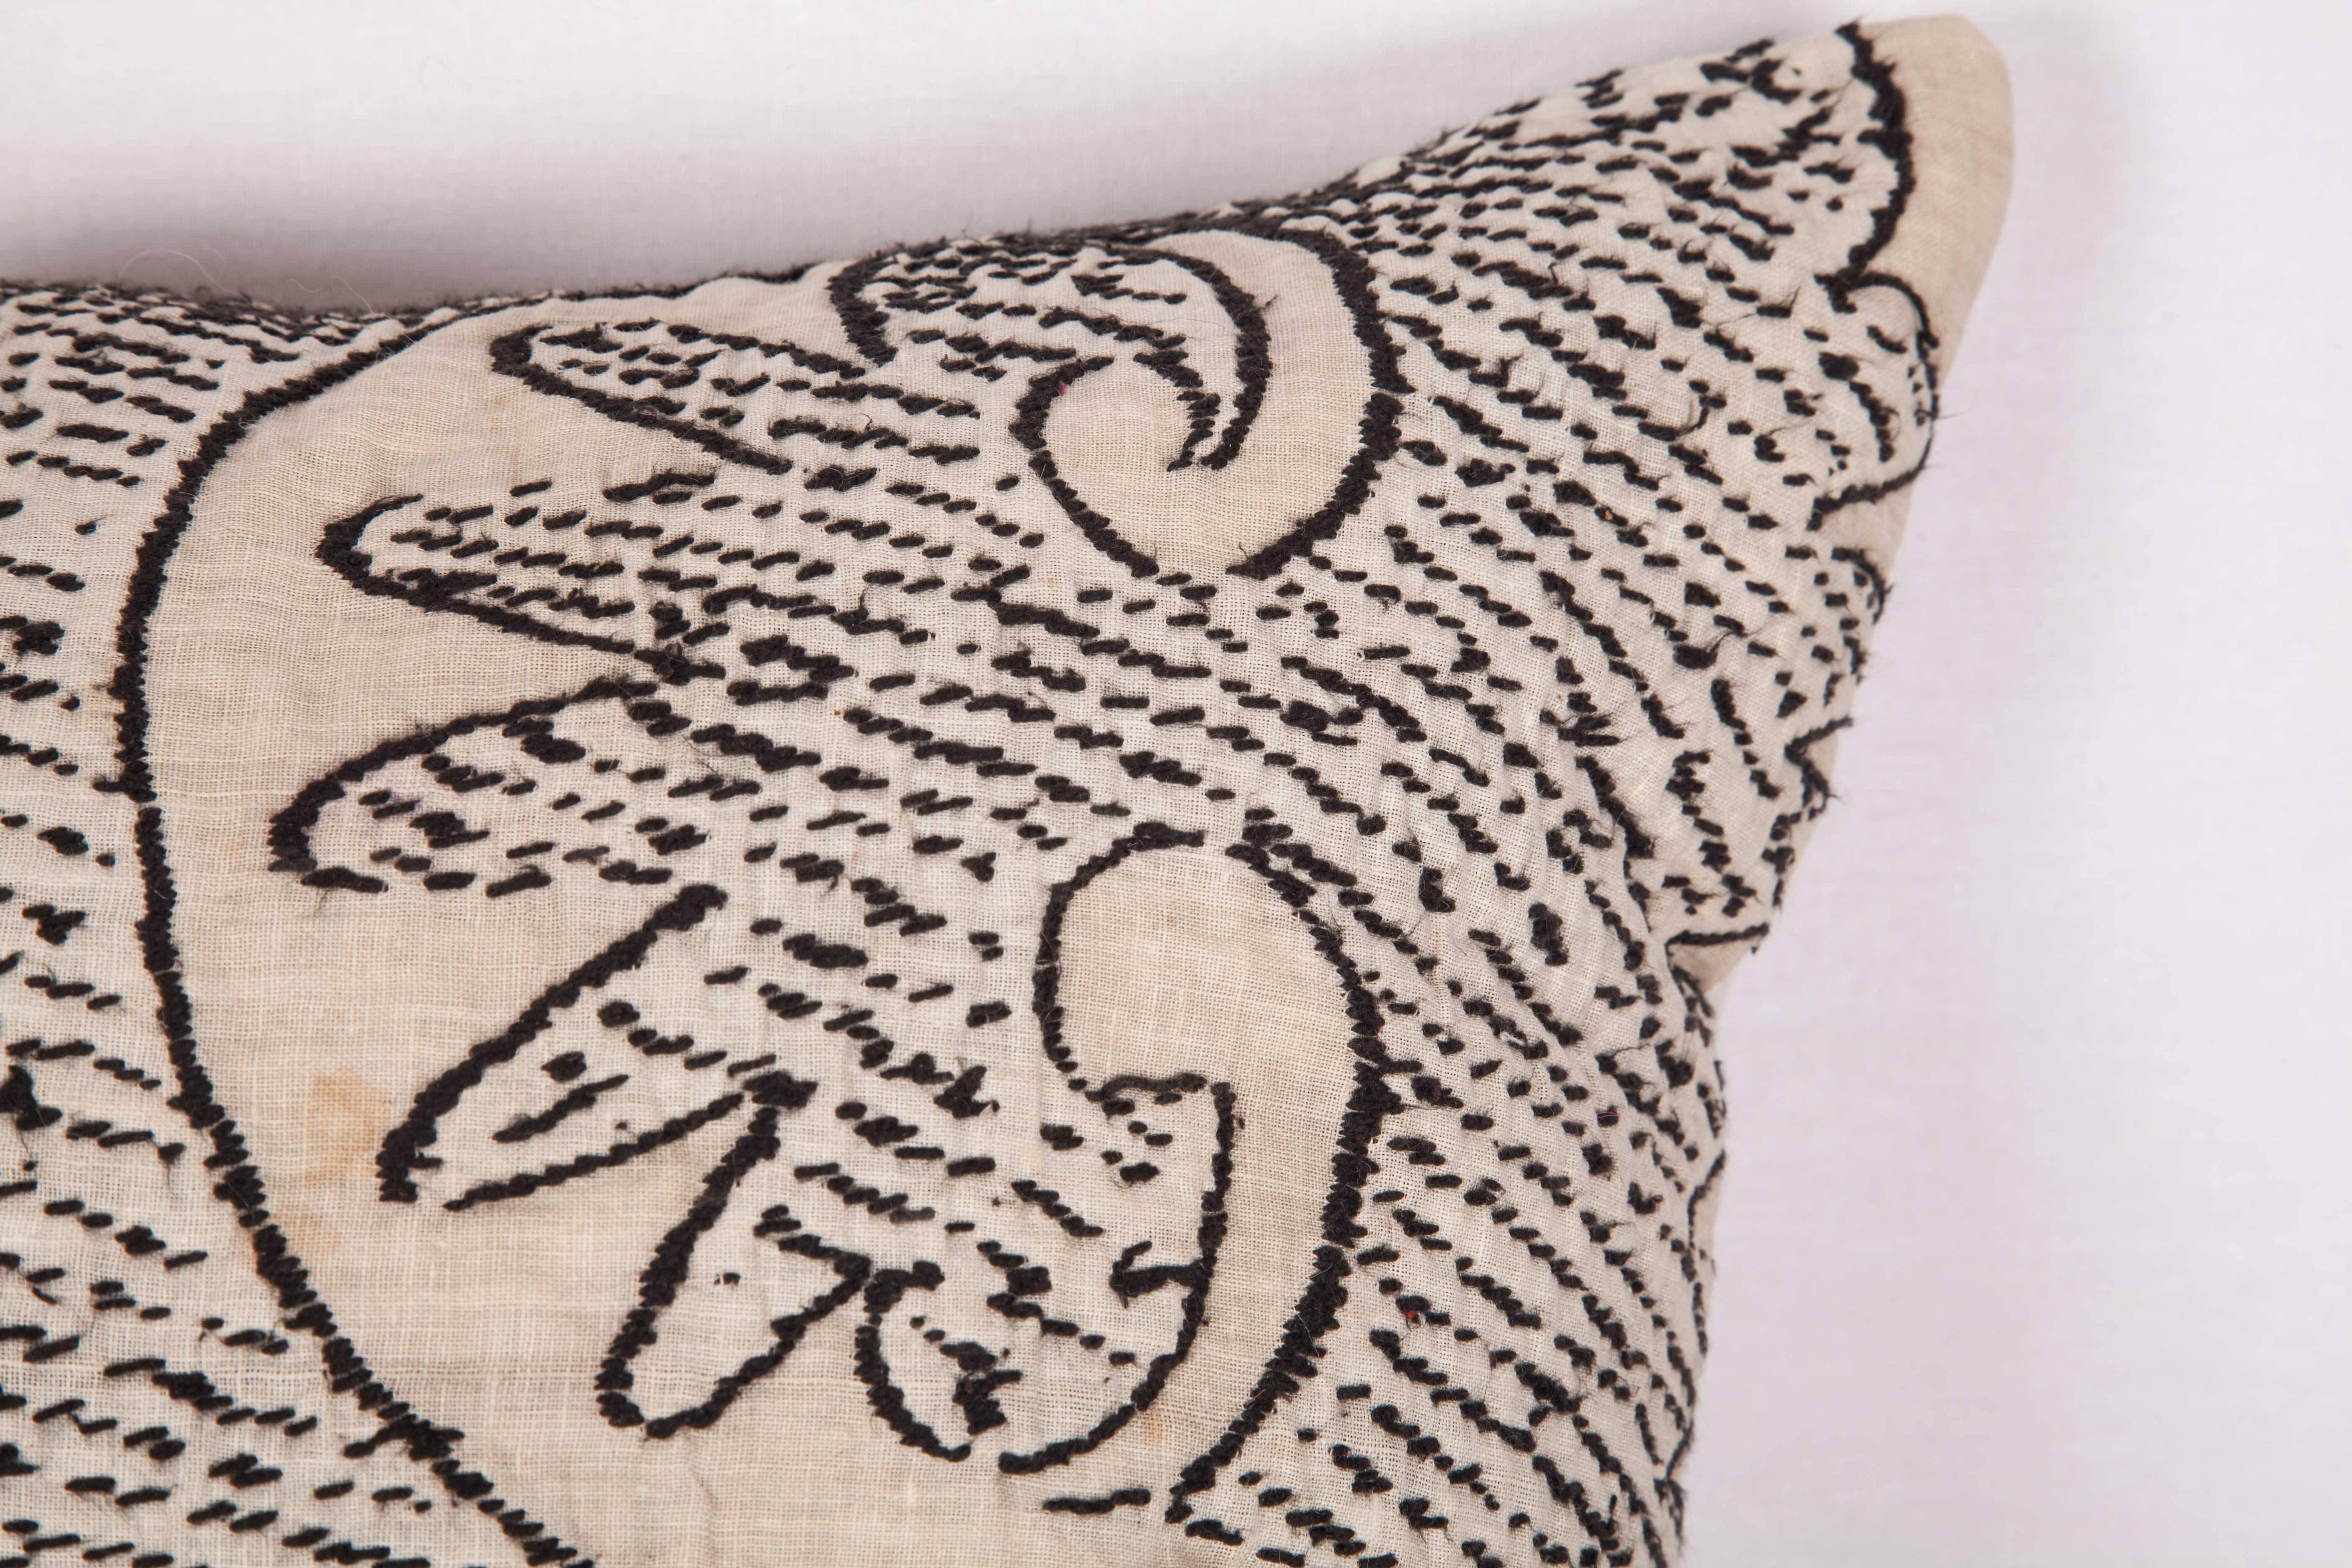 Embroidered Pillow Made Out of a Mid-20th Century Uzbek Samarkand Suzani